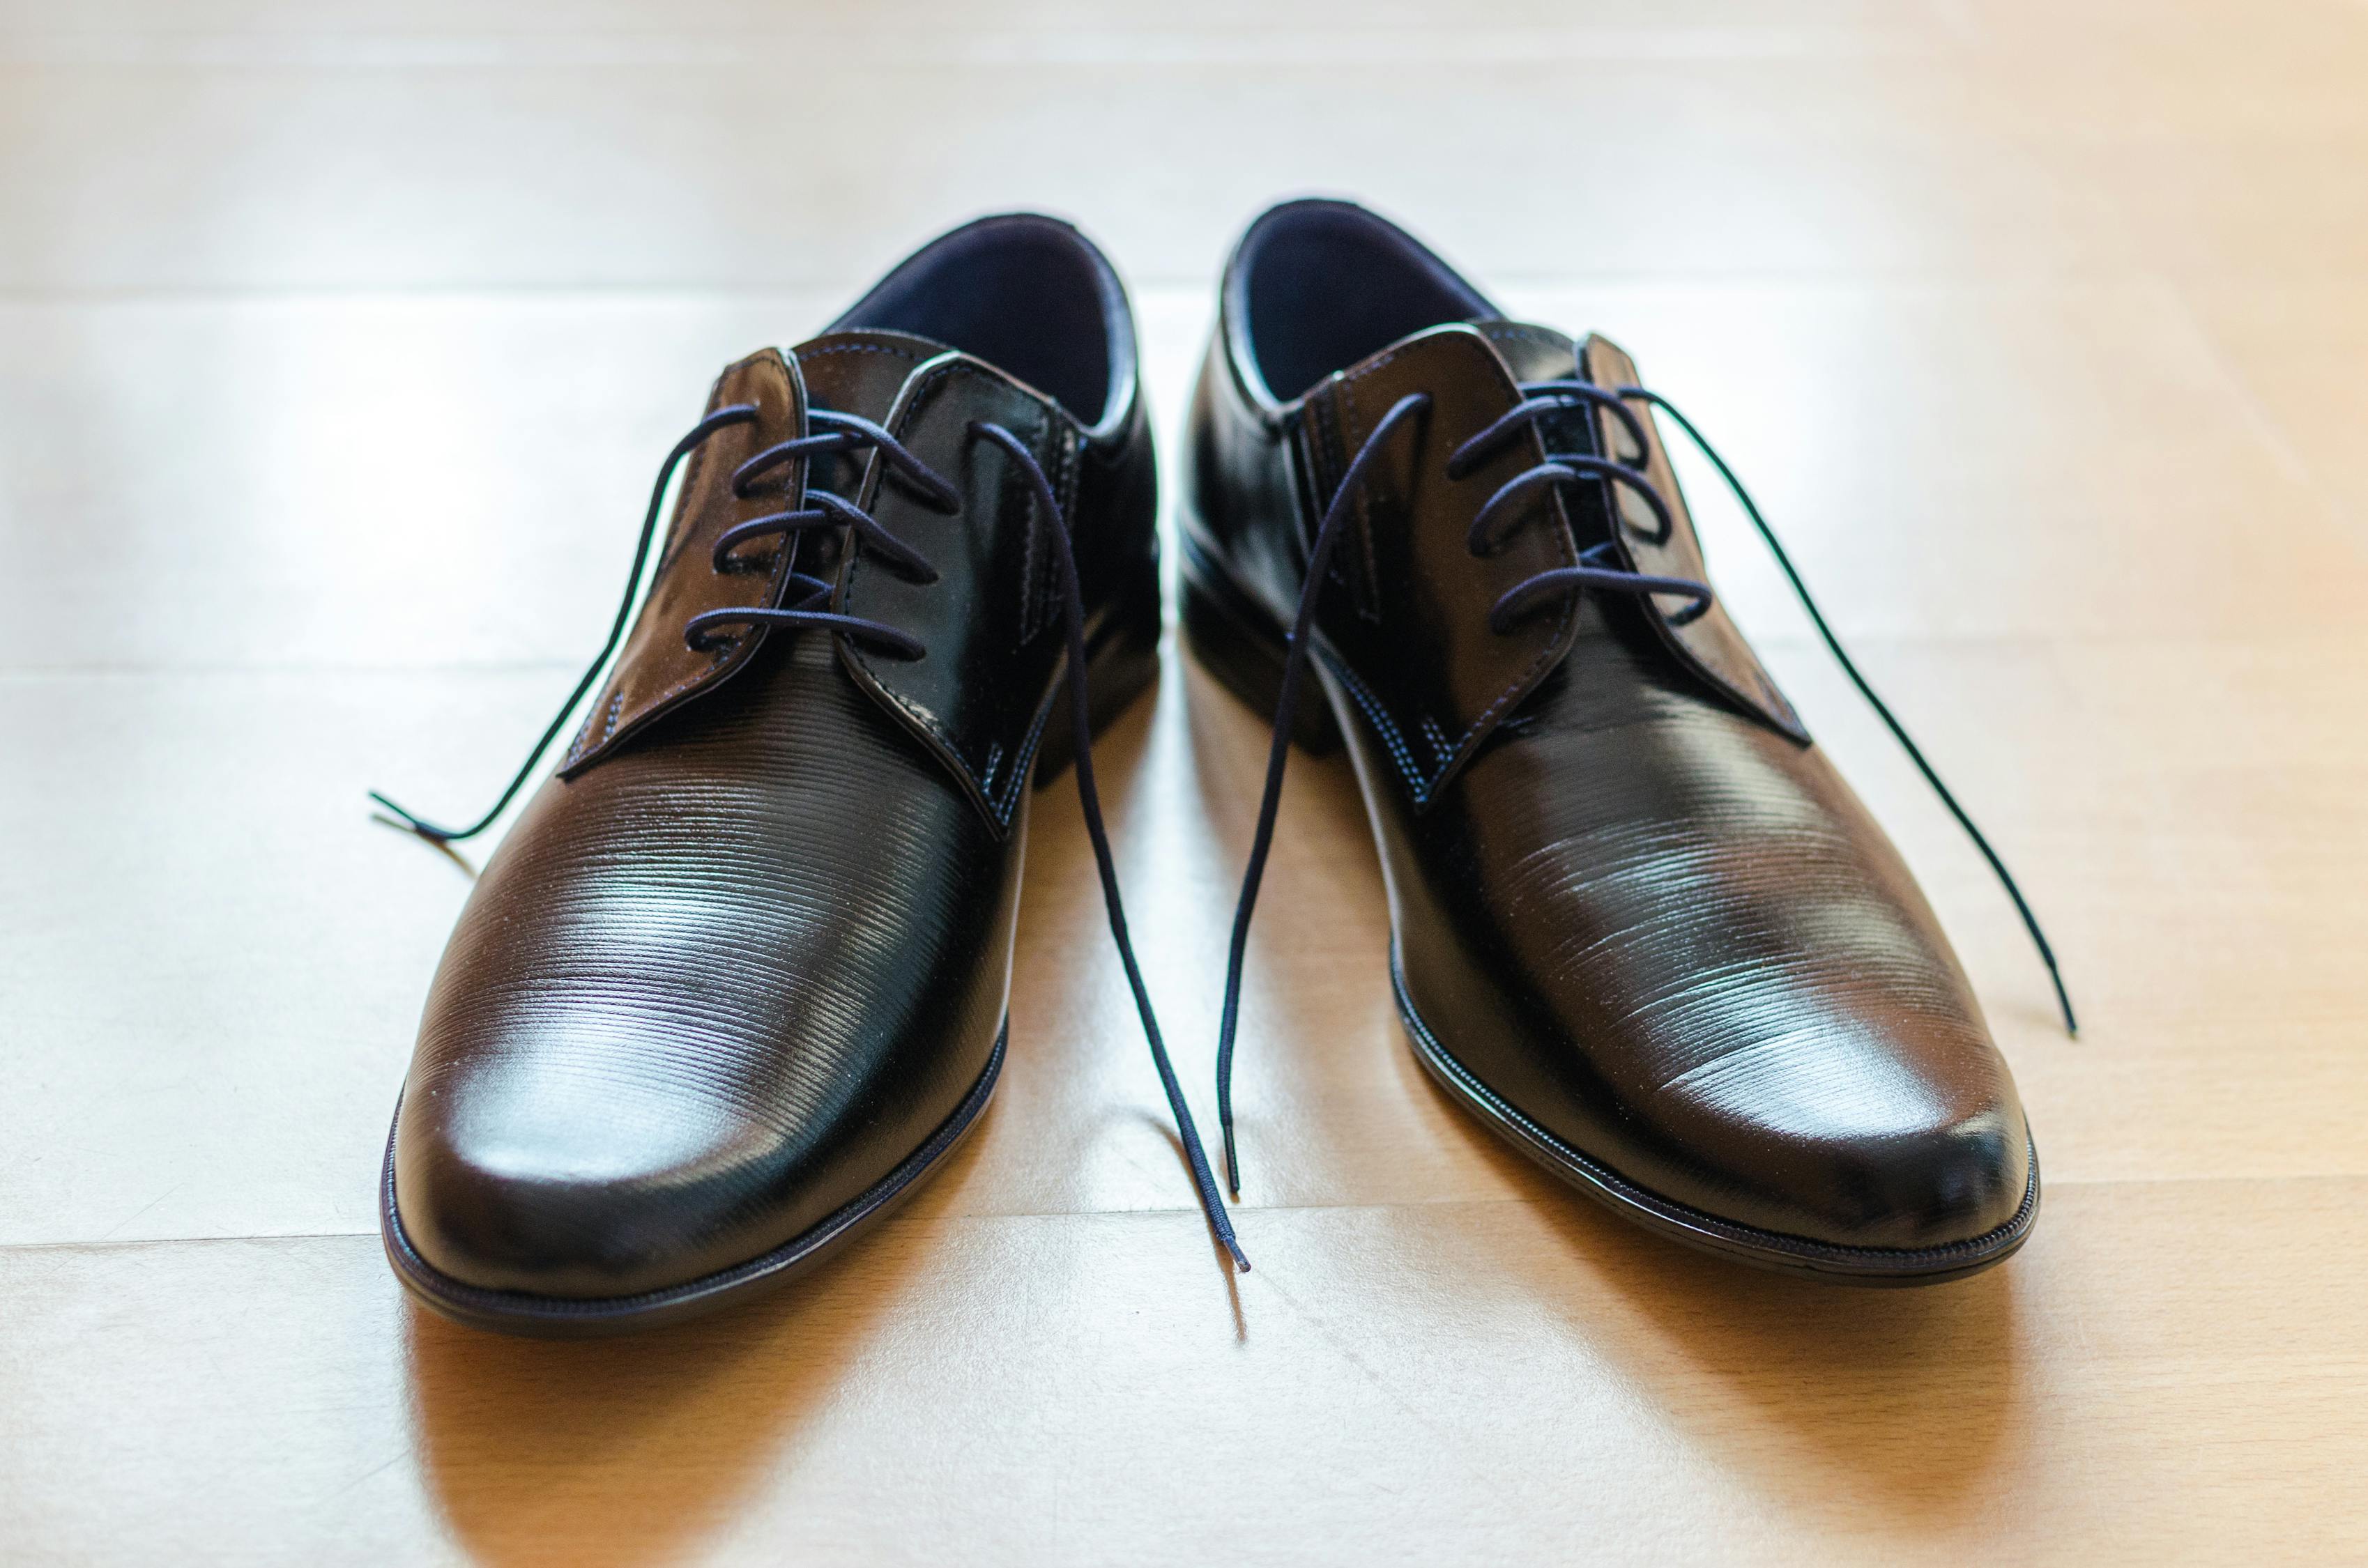 Pair of Black Dress Shoes · Free Stock Photo